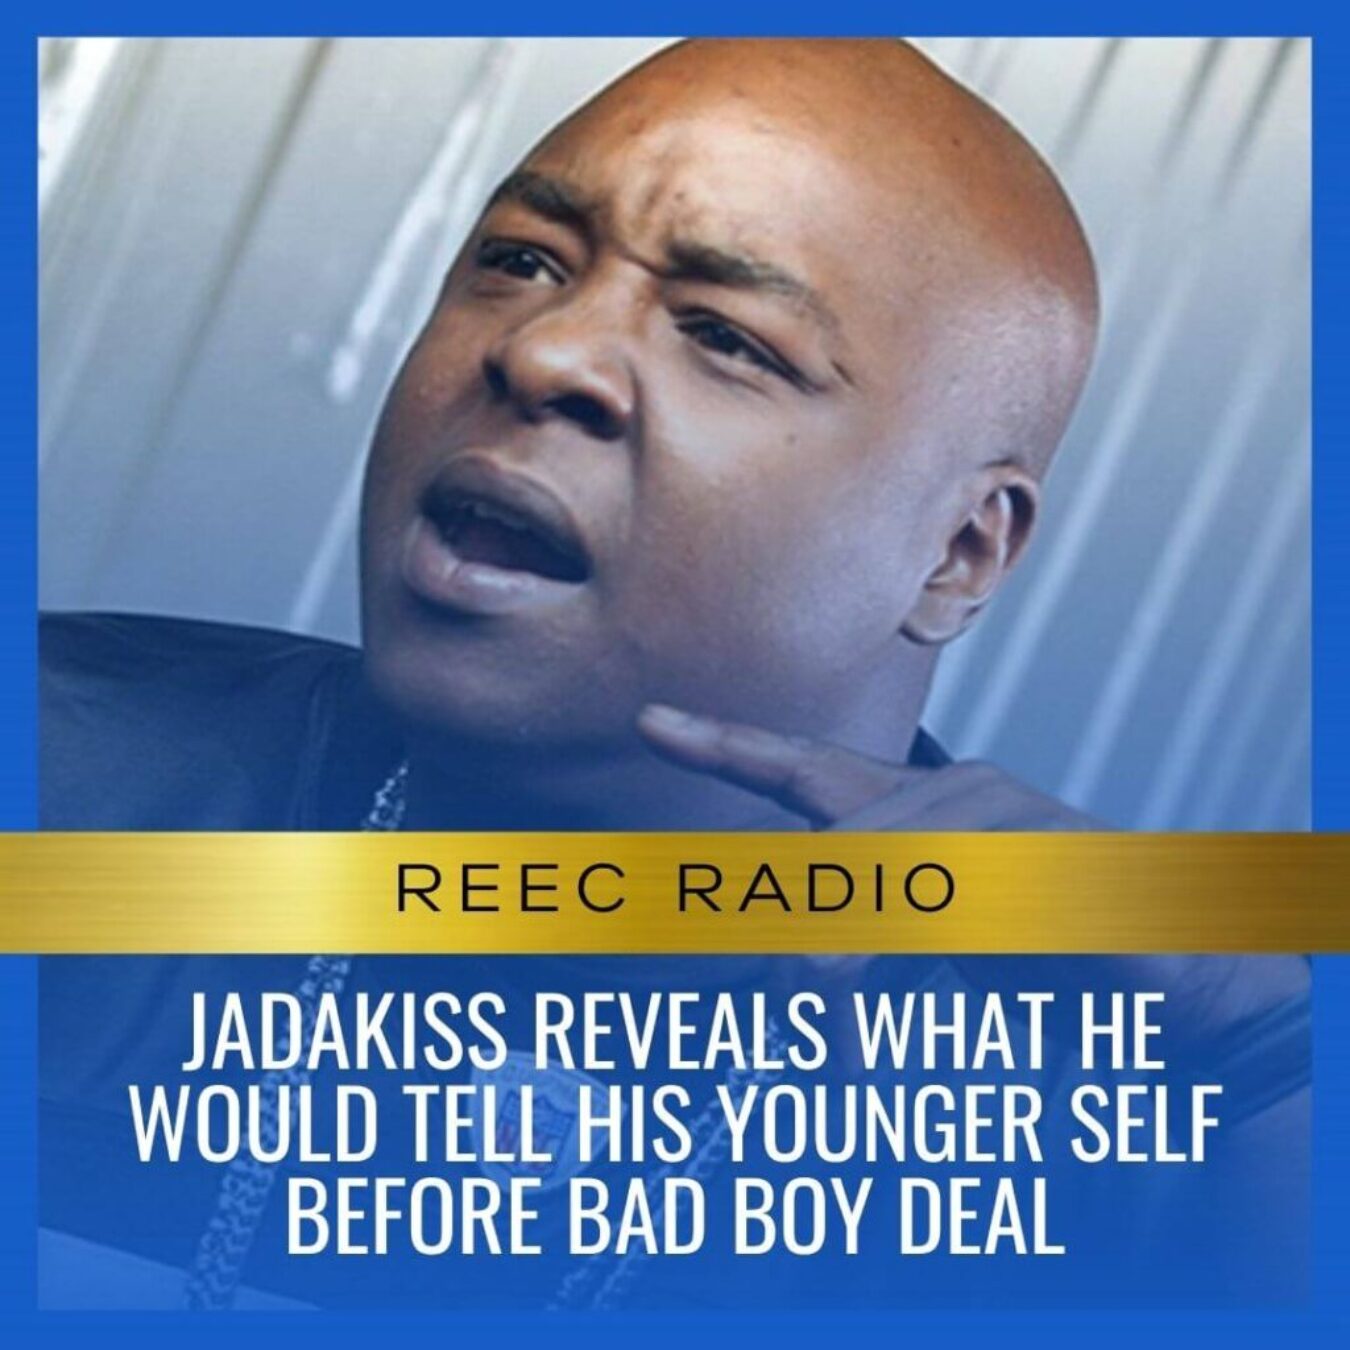 Jadakiss reveals what he would tell his younger self before bad boy deal